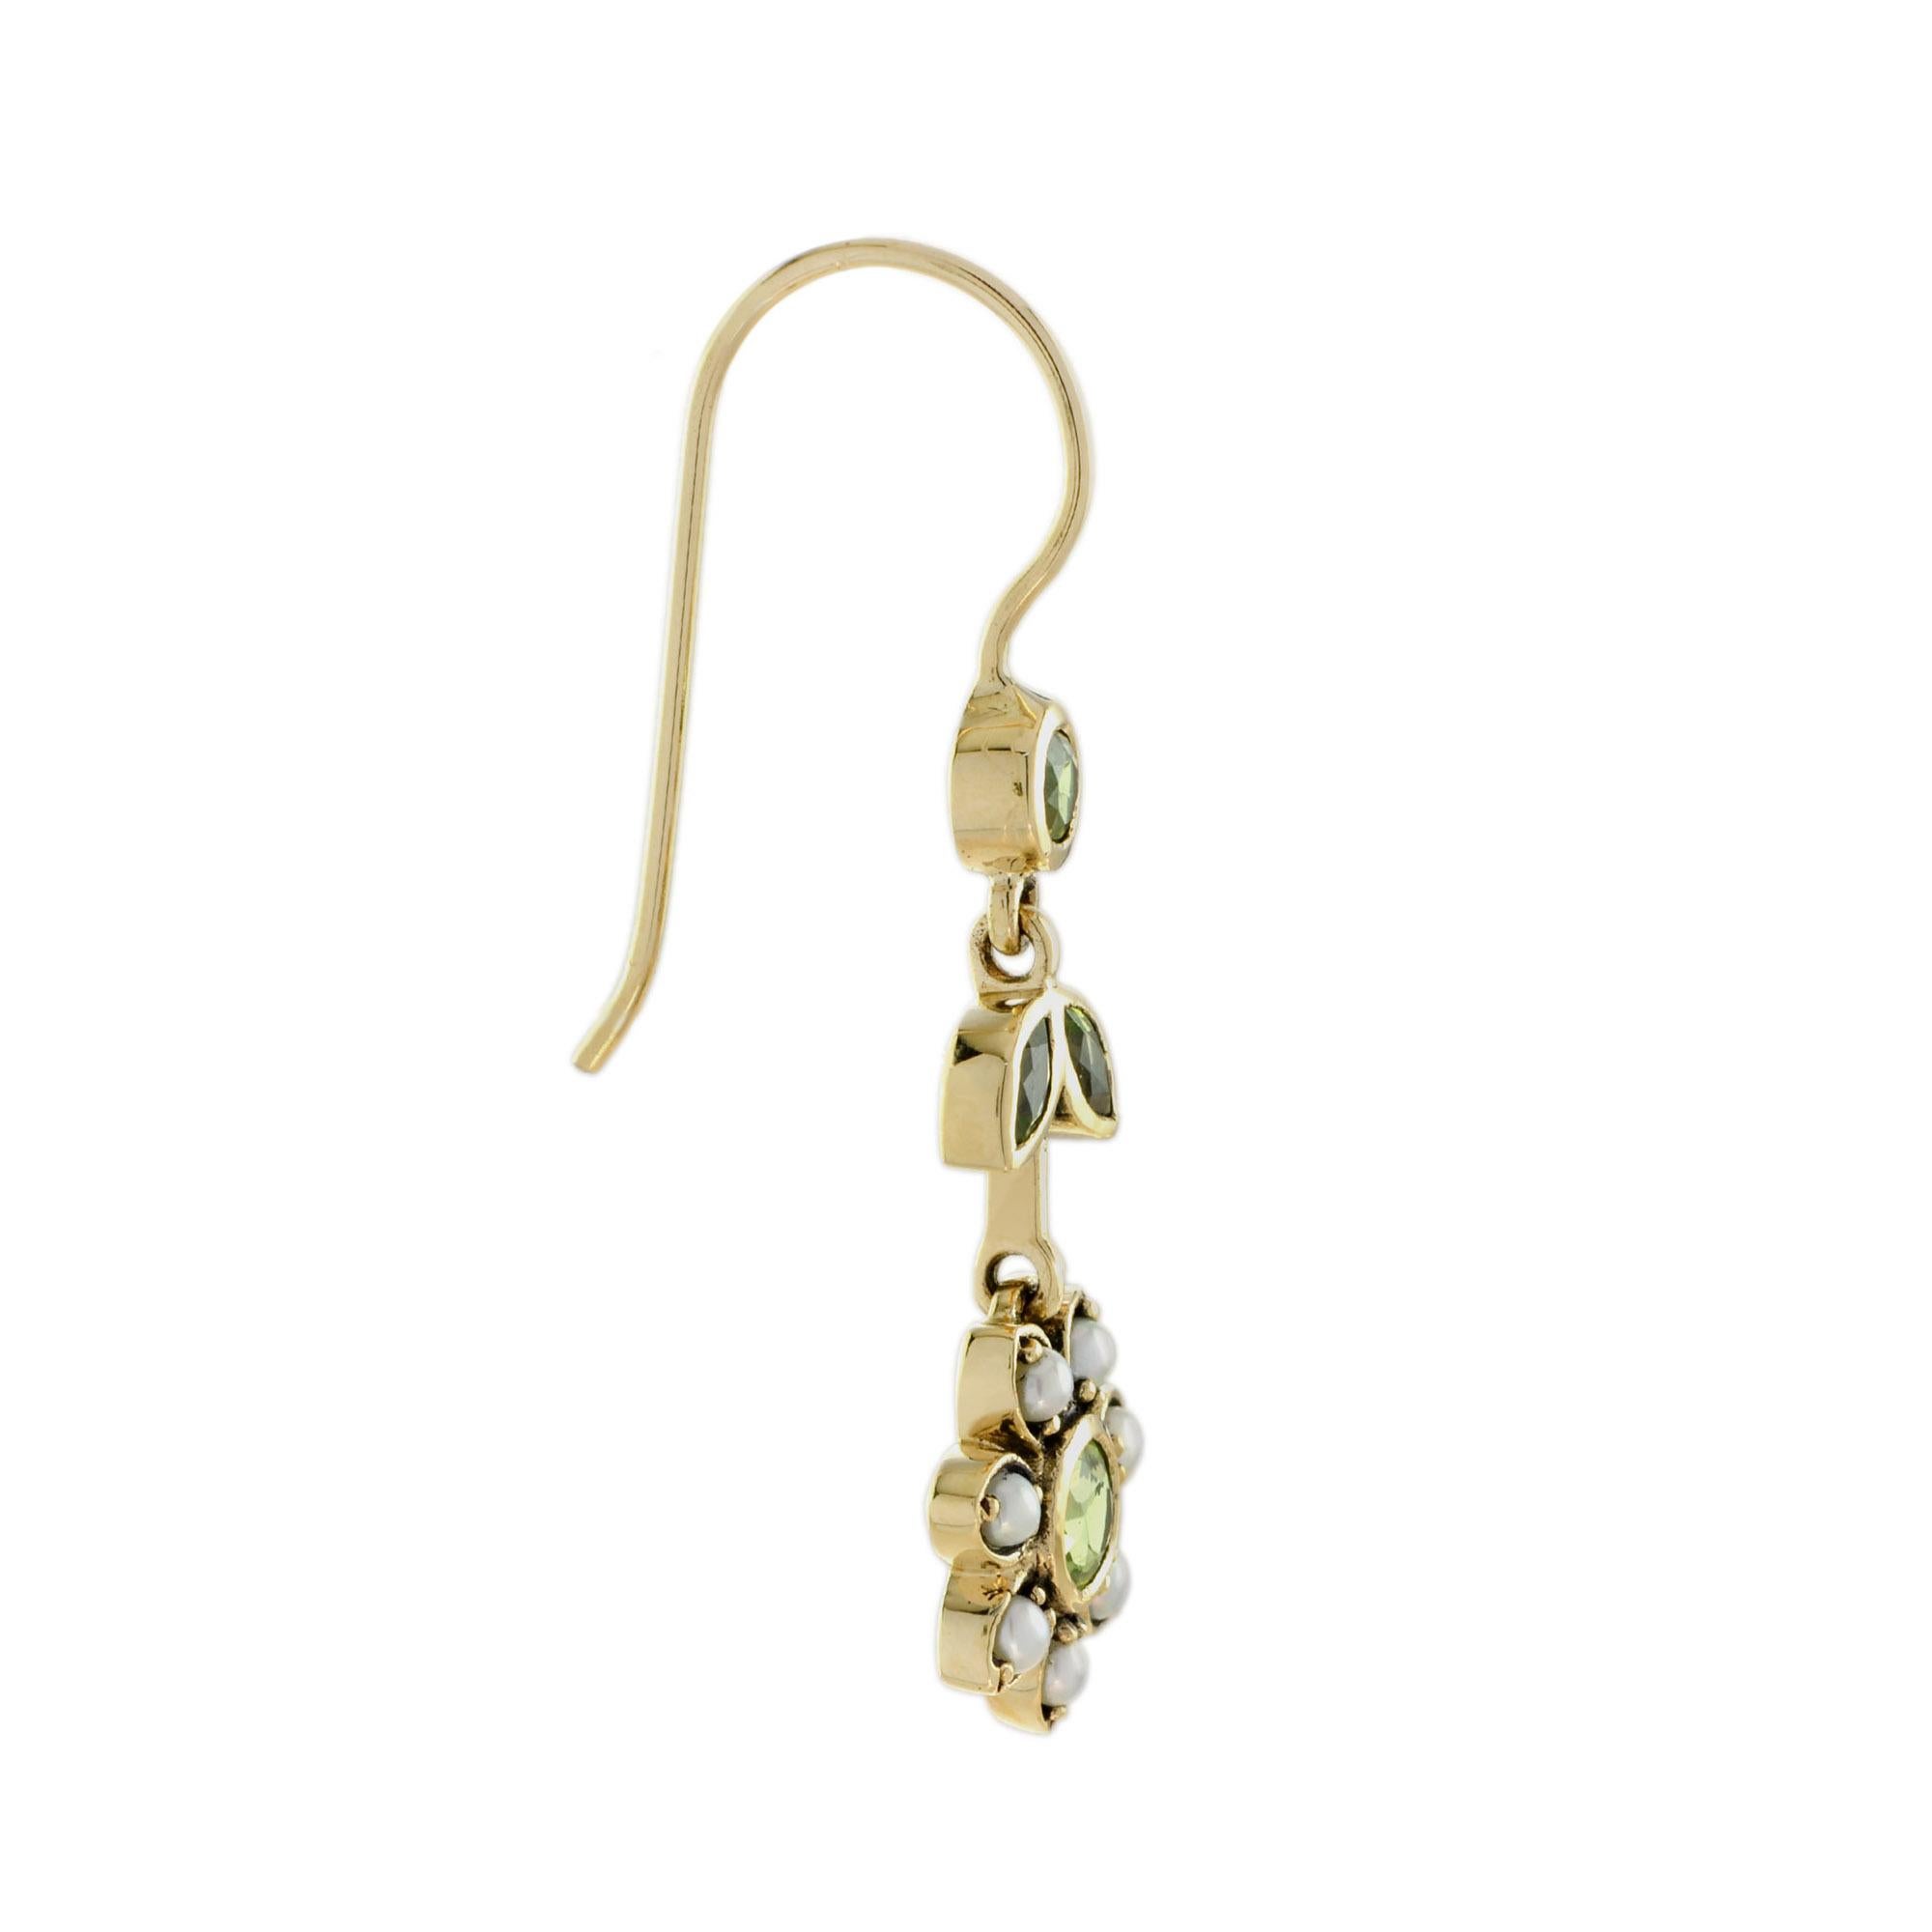 Beautifully and finely detailed vintage style peridot and pearl drop earrings set with total of 1.25 carat peridot and 1.6 carat pearl crafted in 9k yellow gold. A perfect complement to every wardrobe. 

Earrings Information
Metal: 9K Yellow Gold